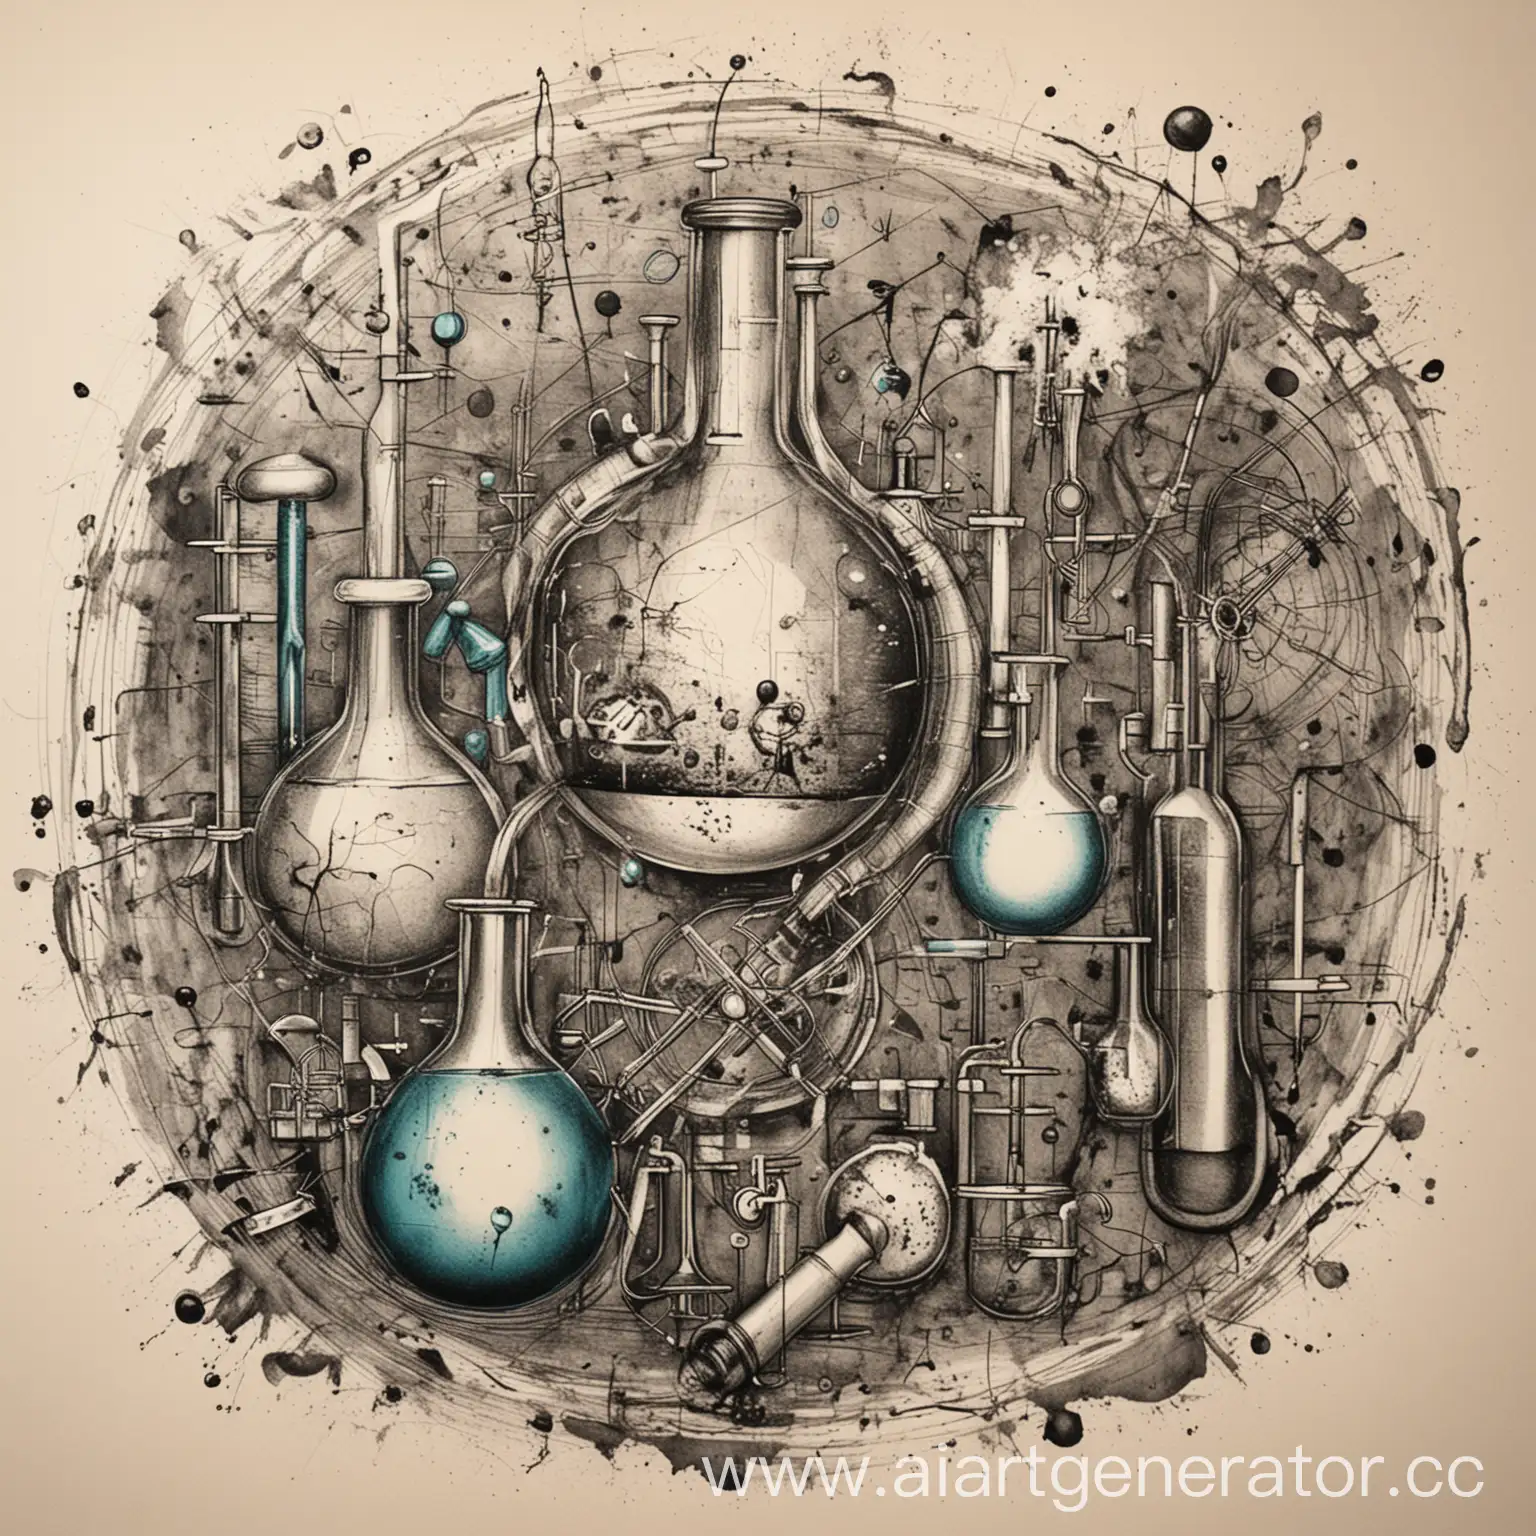 Abstract drawing with a scientific-chemical theme, no chemical utensils